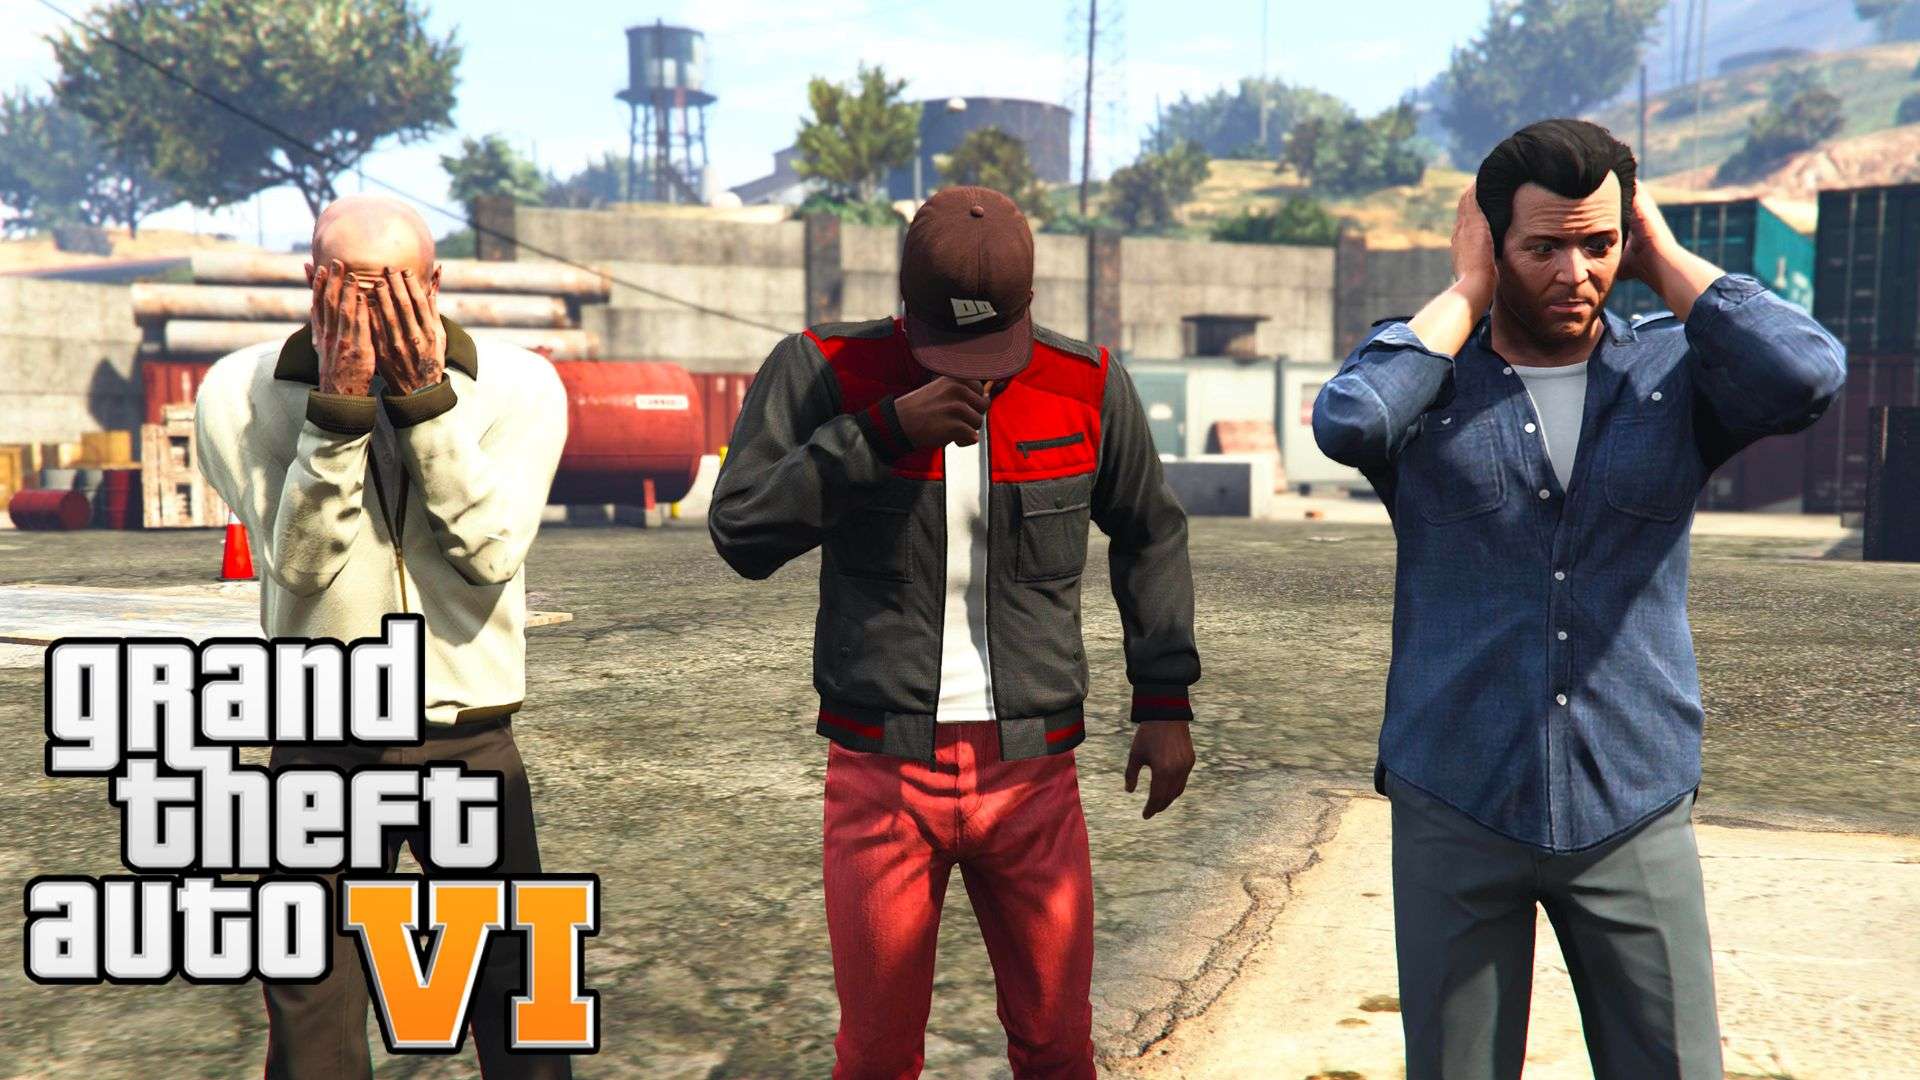 GTA 5 characters with heads in hands